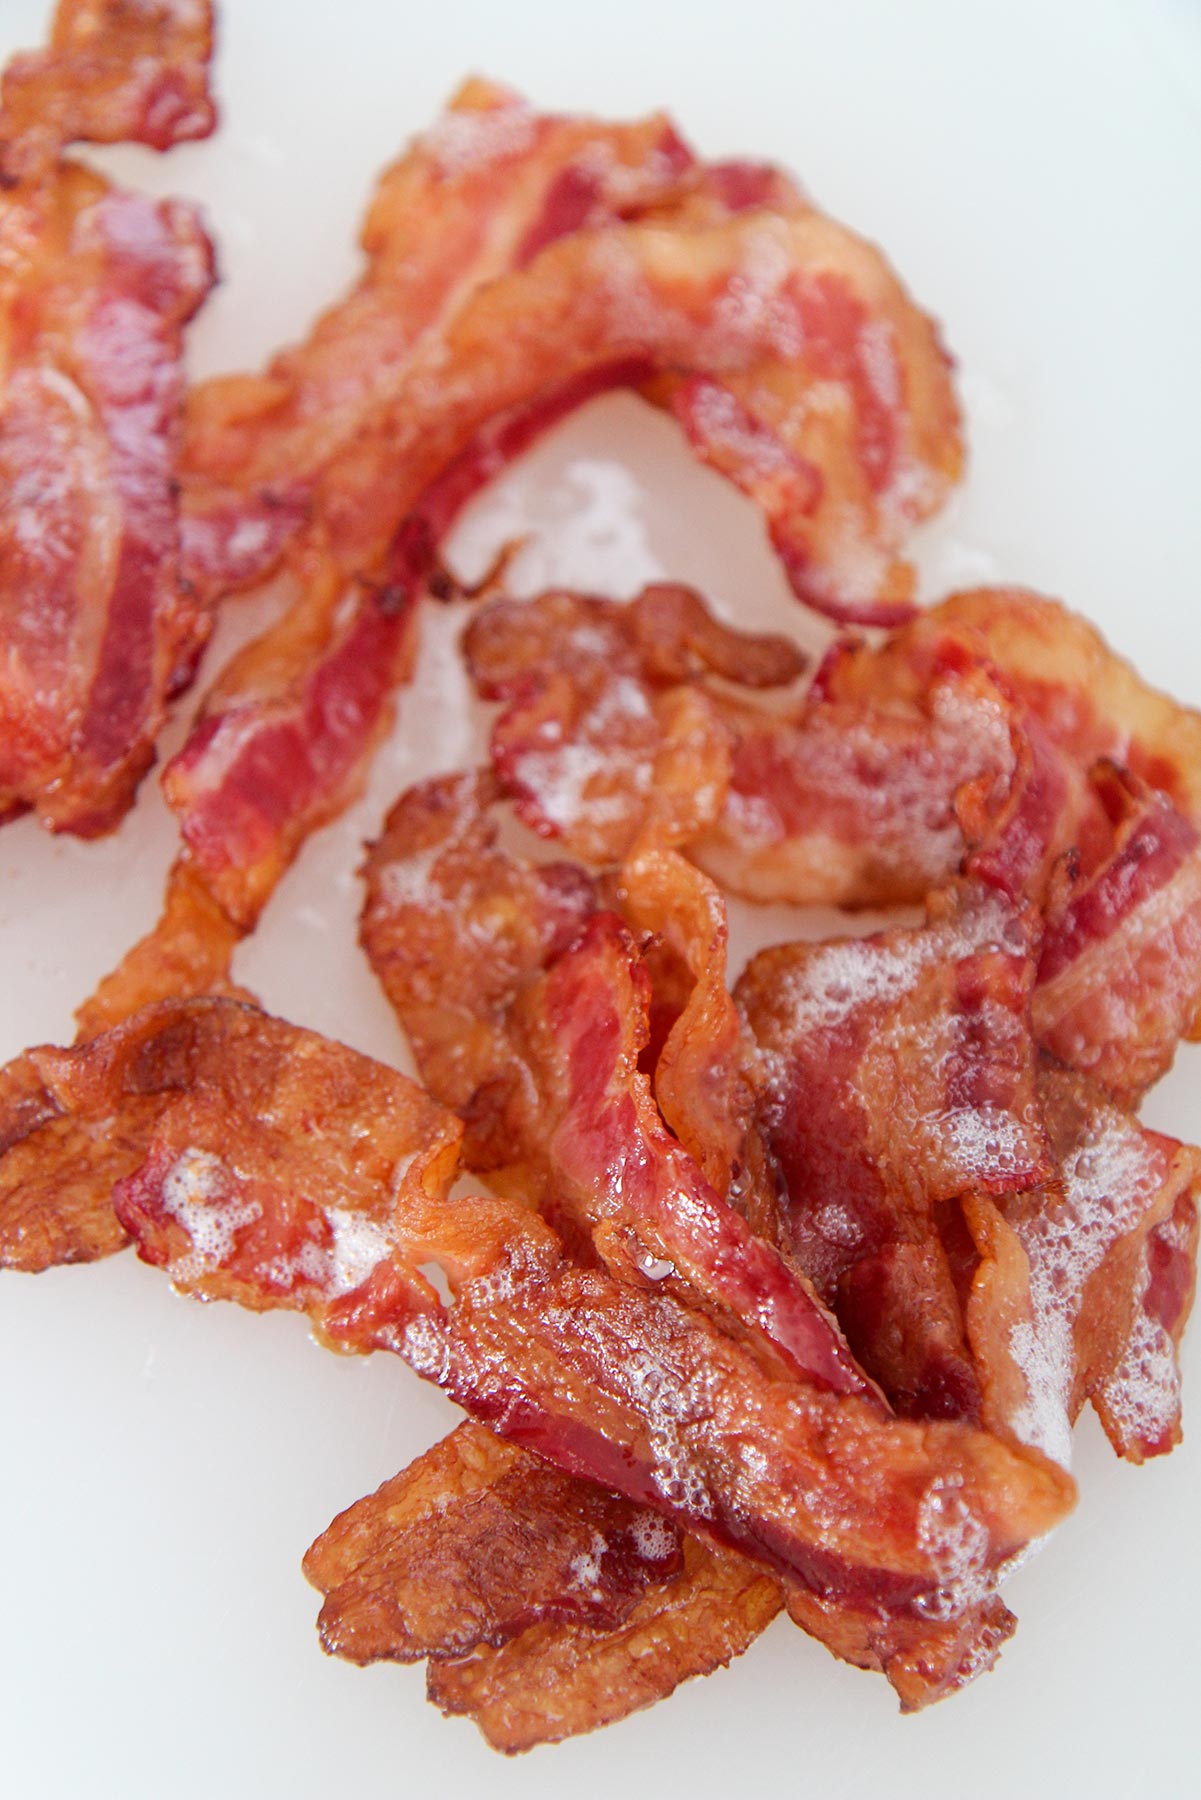 How to Bake Bacon In The Oven - My Forking Life